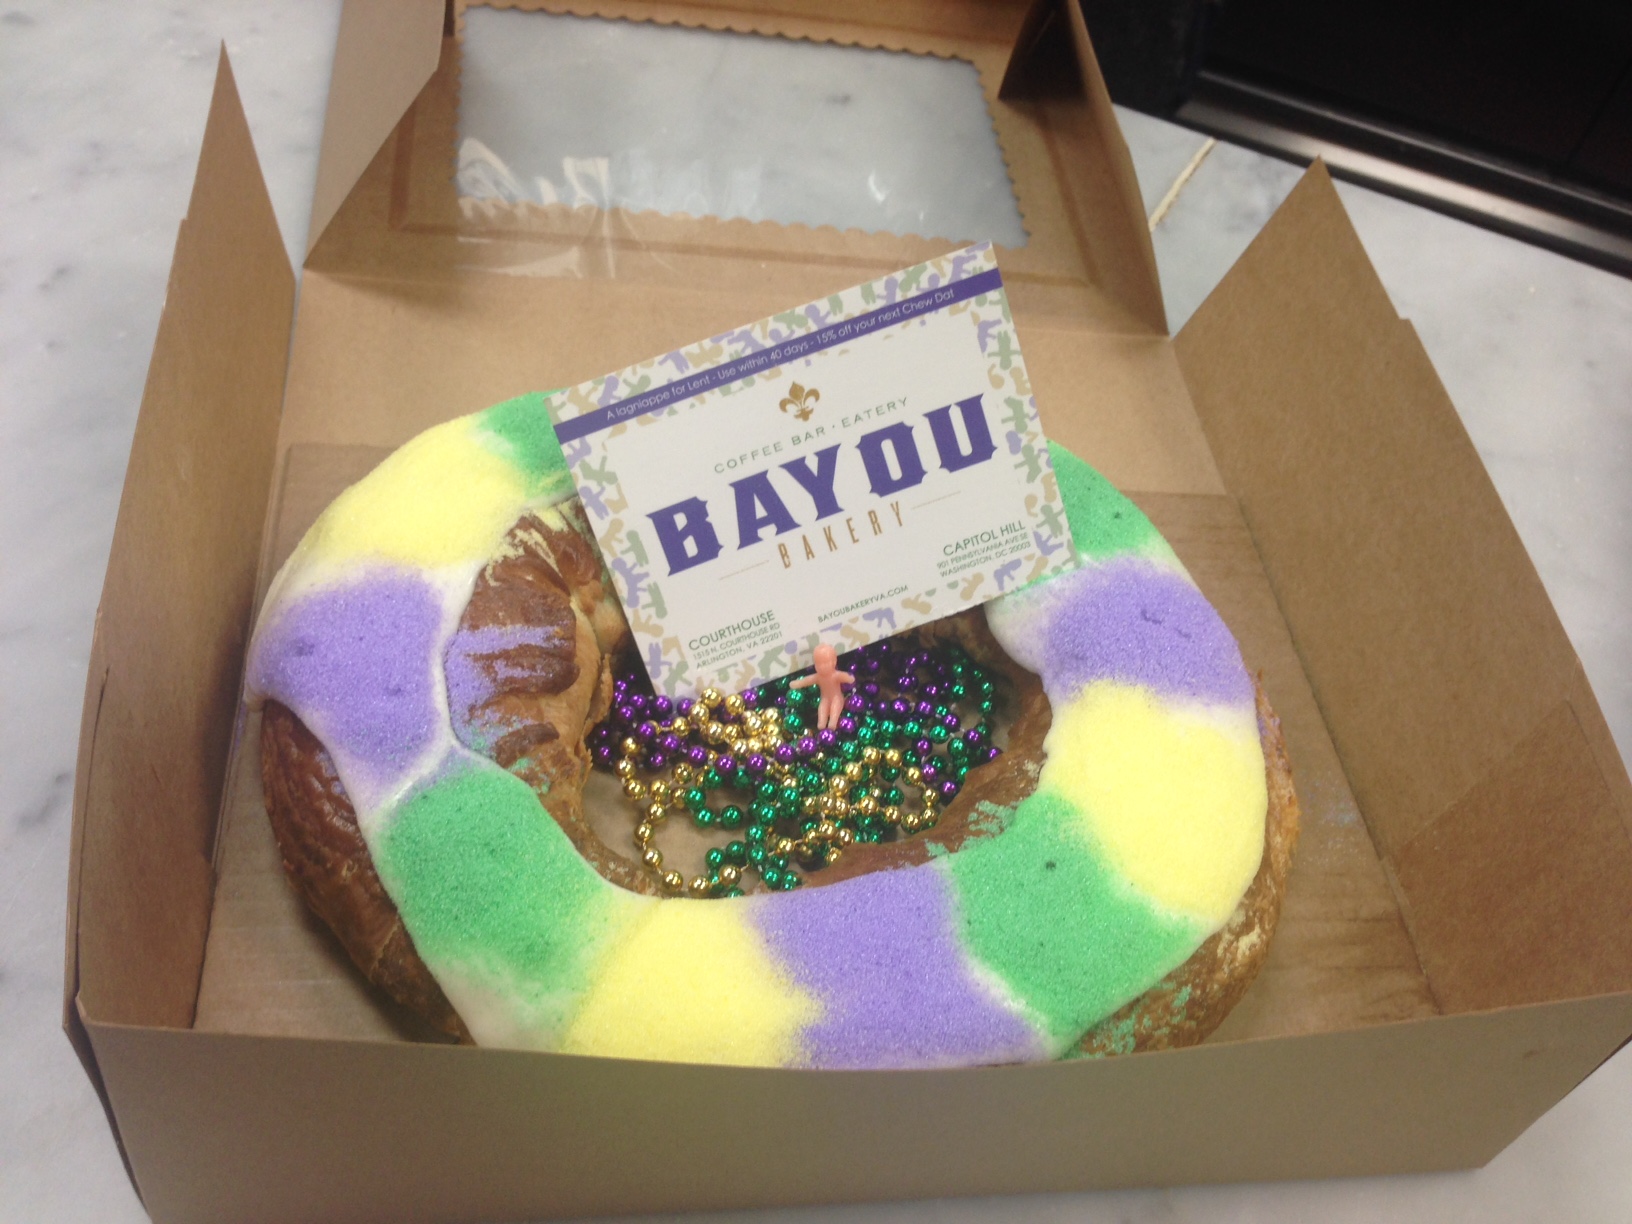 Let them eat king cake The history, ingredients behind the Mardi Gras